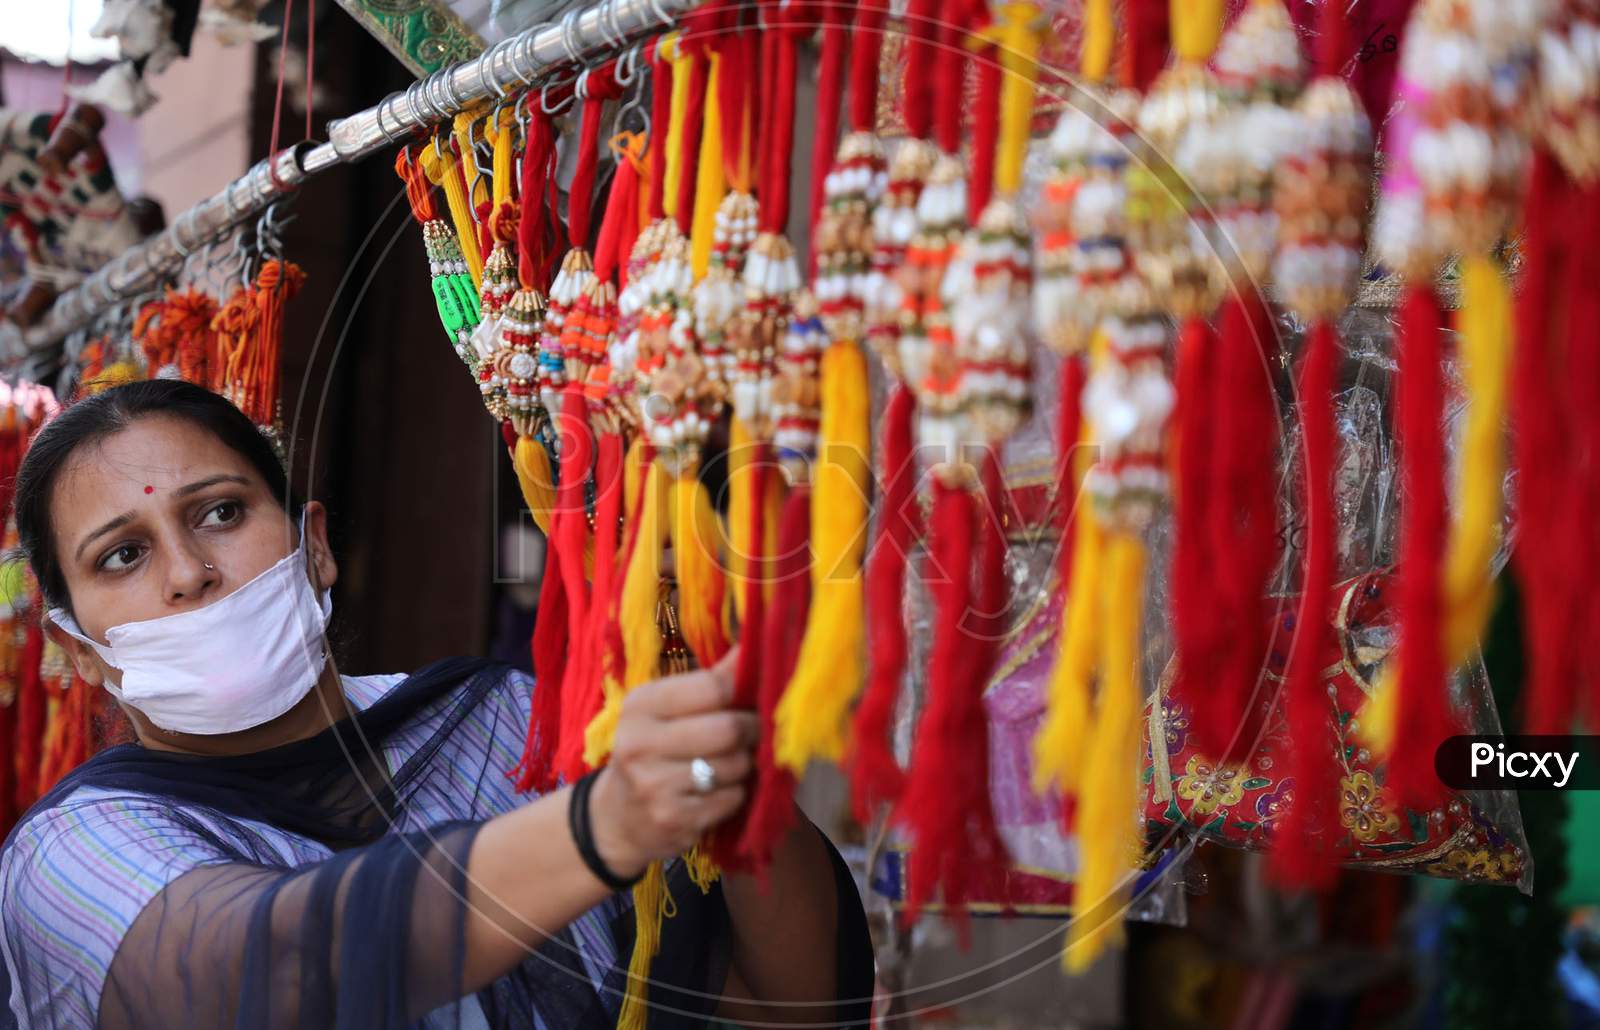 A woman buys rakhi, a bracelet made of thread ahead of the Raksha Bandhan, a festival which celebrates the bond between brothers and sisters in Jammu on July 22, 2020